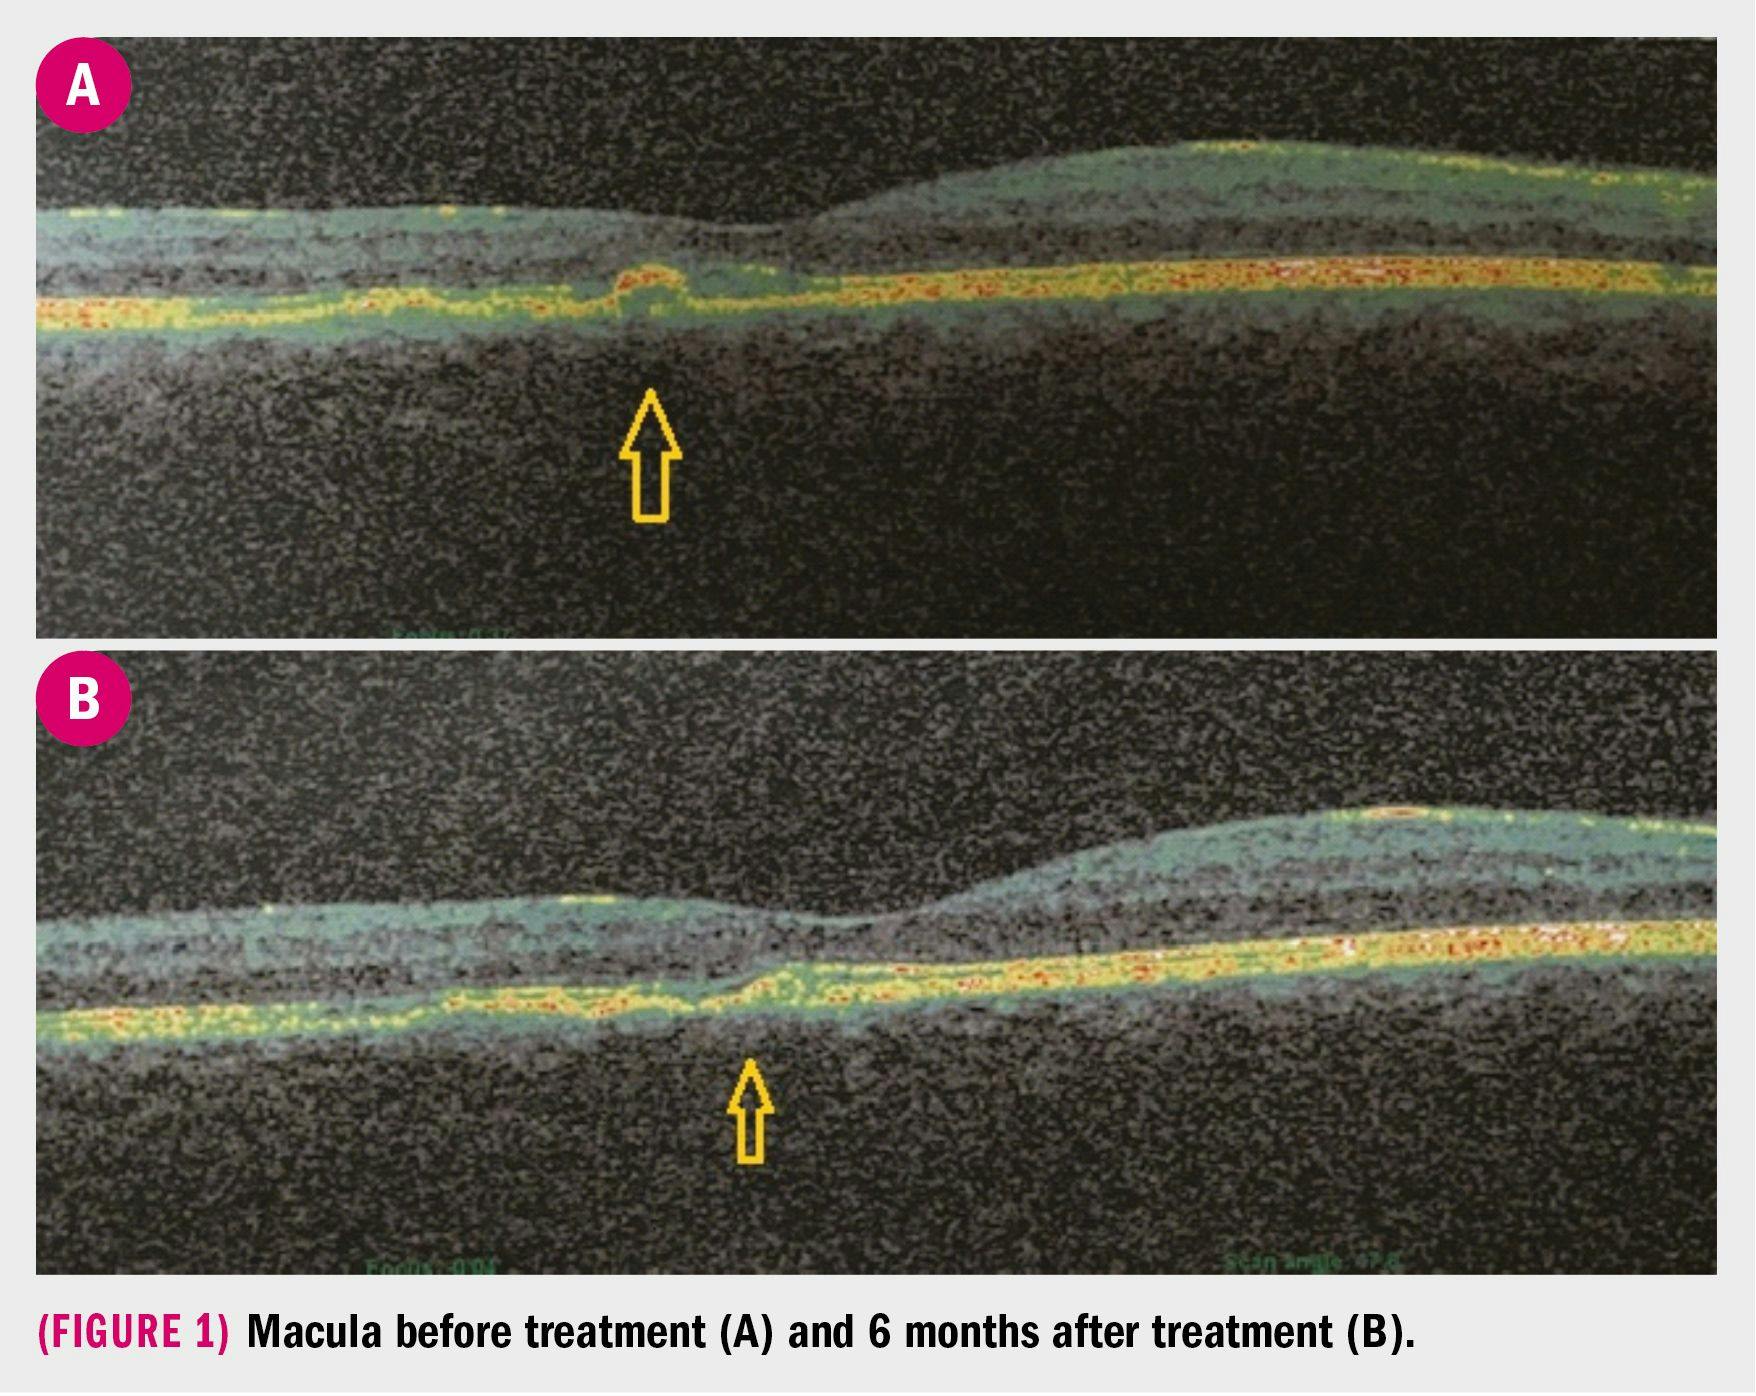 Macula before and after treatment